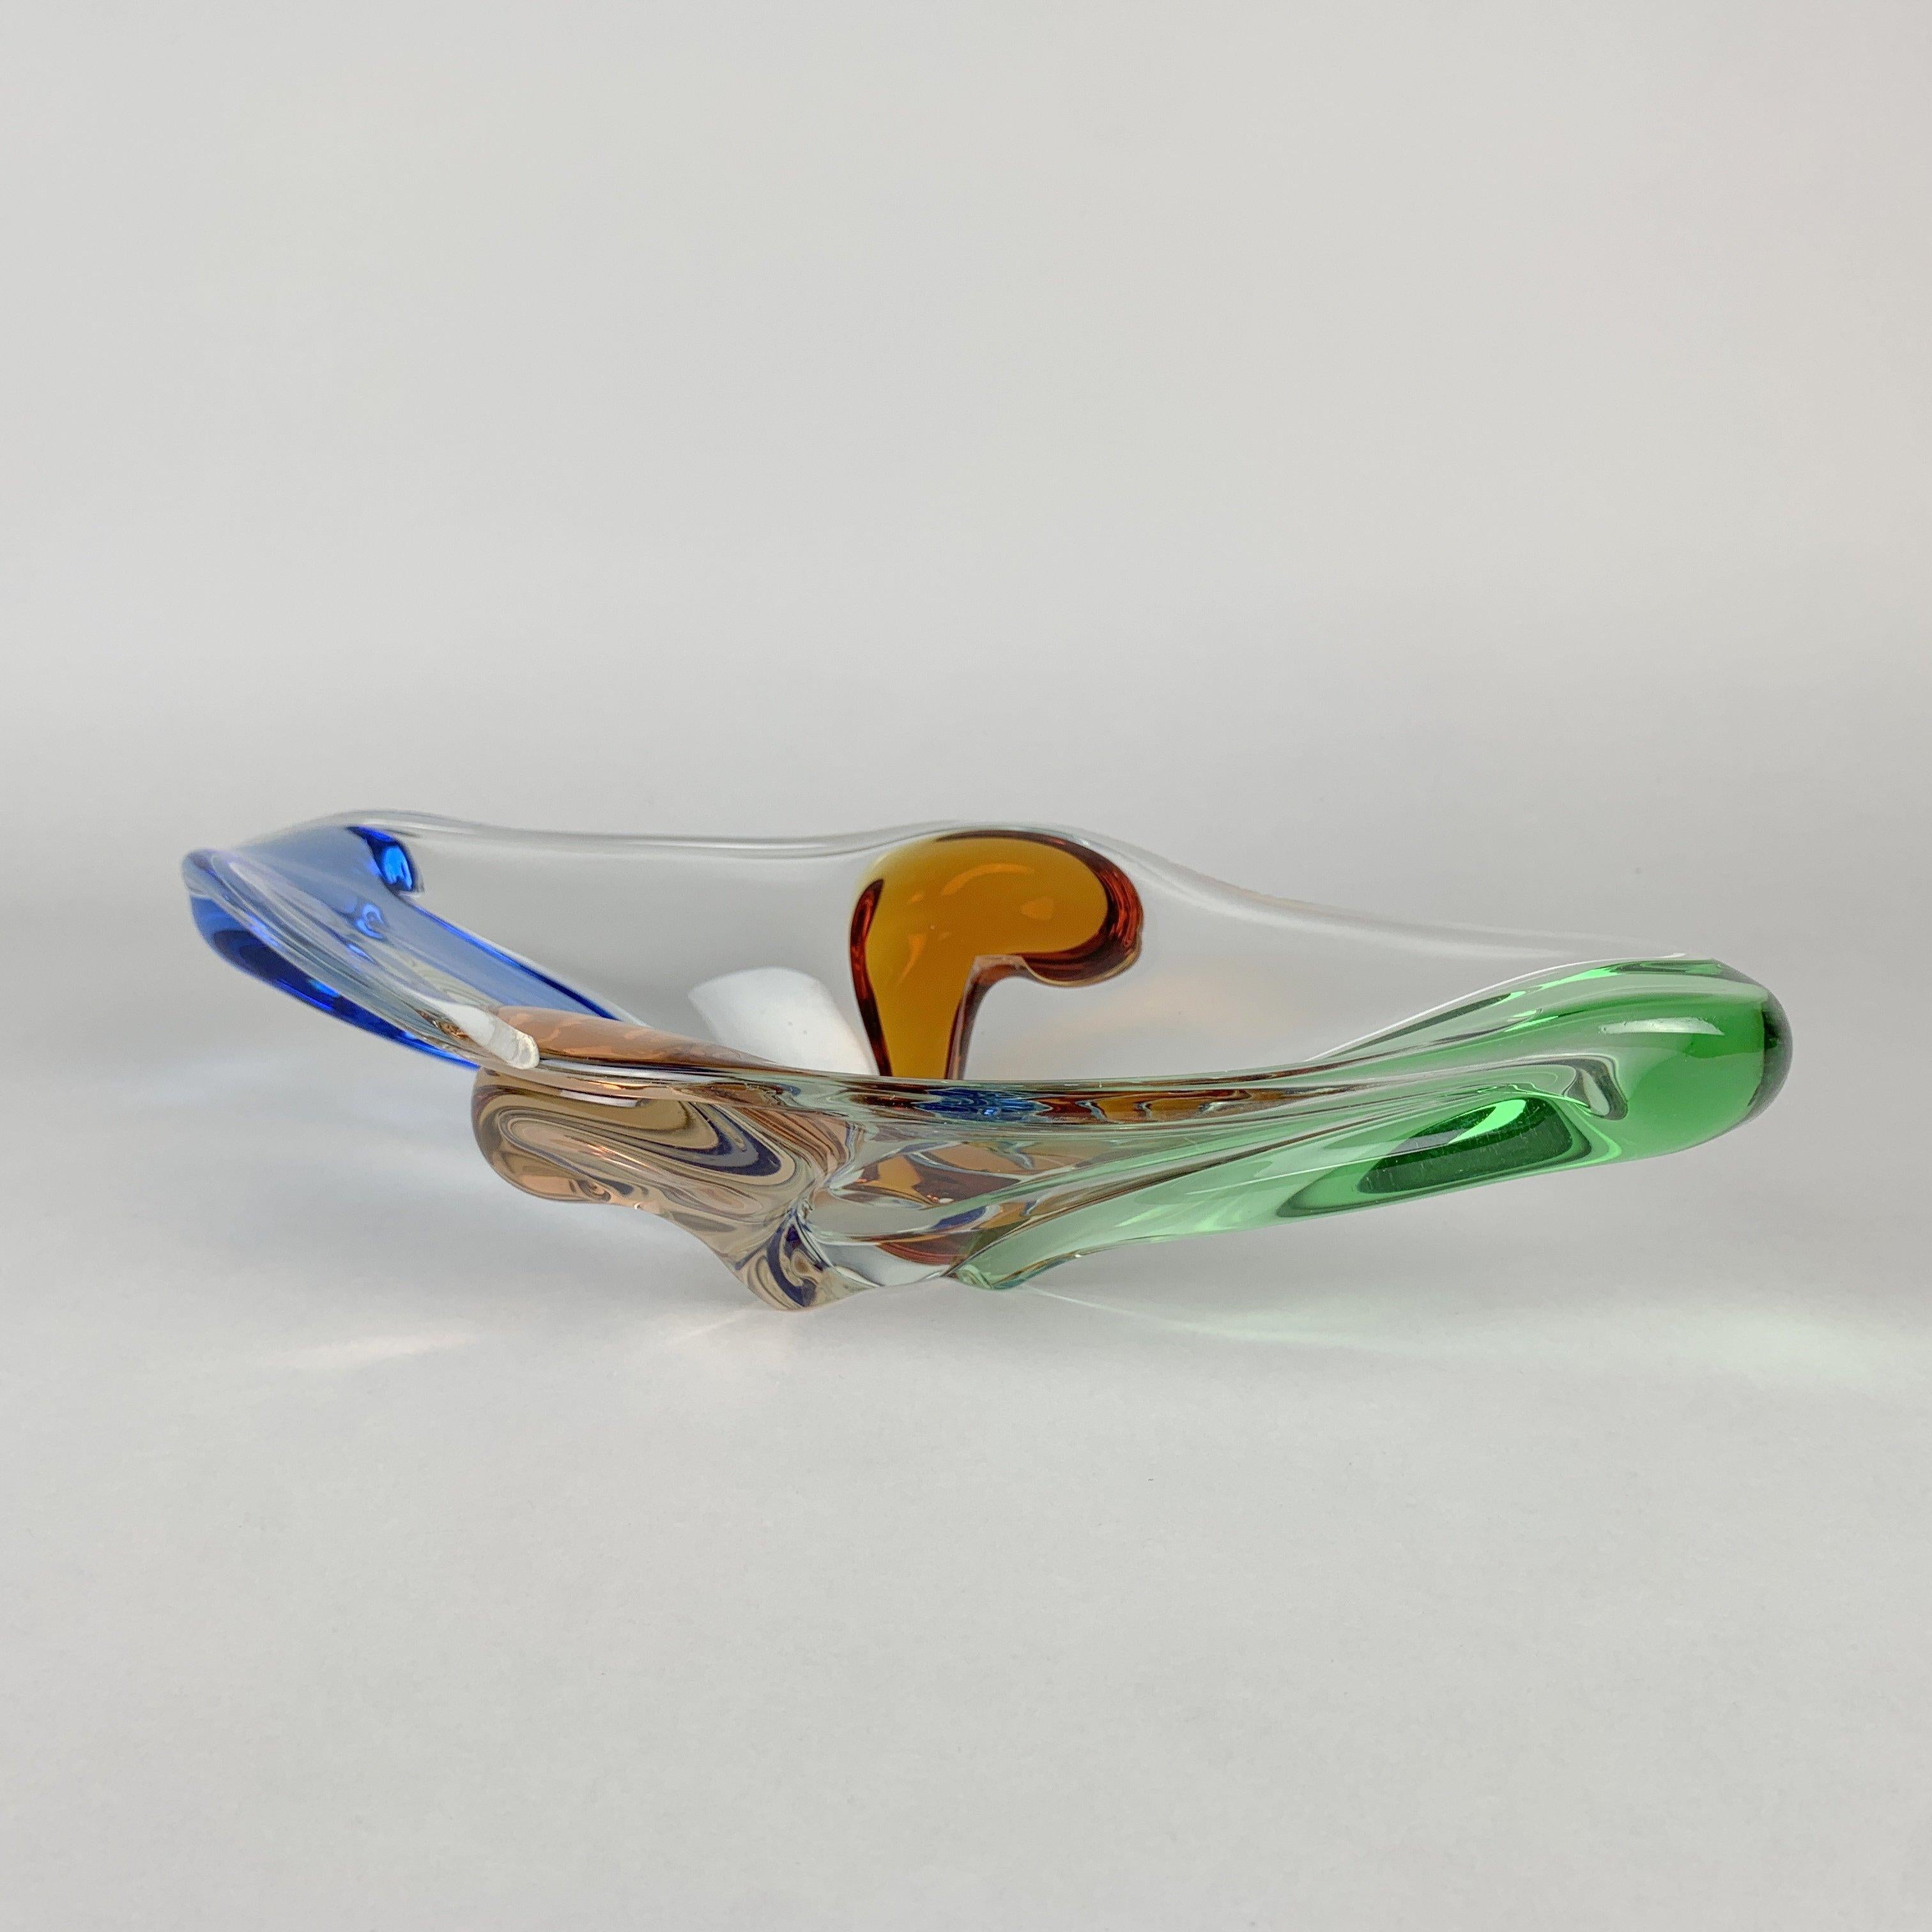 Mid-20th Century Art Glass Bowl by F. Zemek for Mstisov Glassworks, Rhapsody Collection, 1950s For Sale